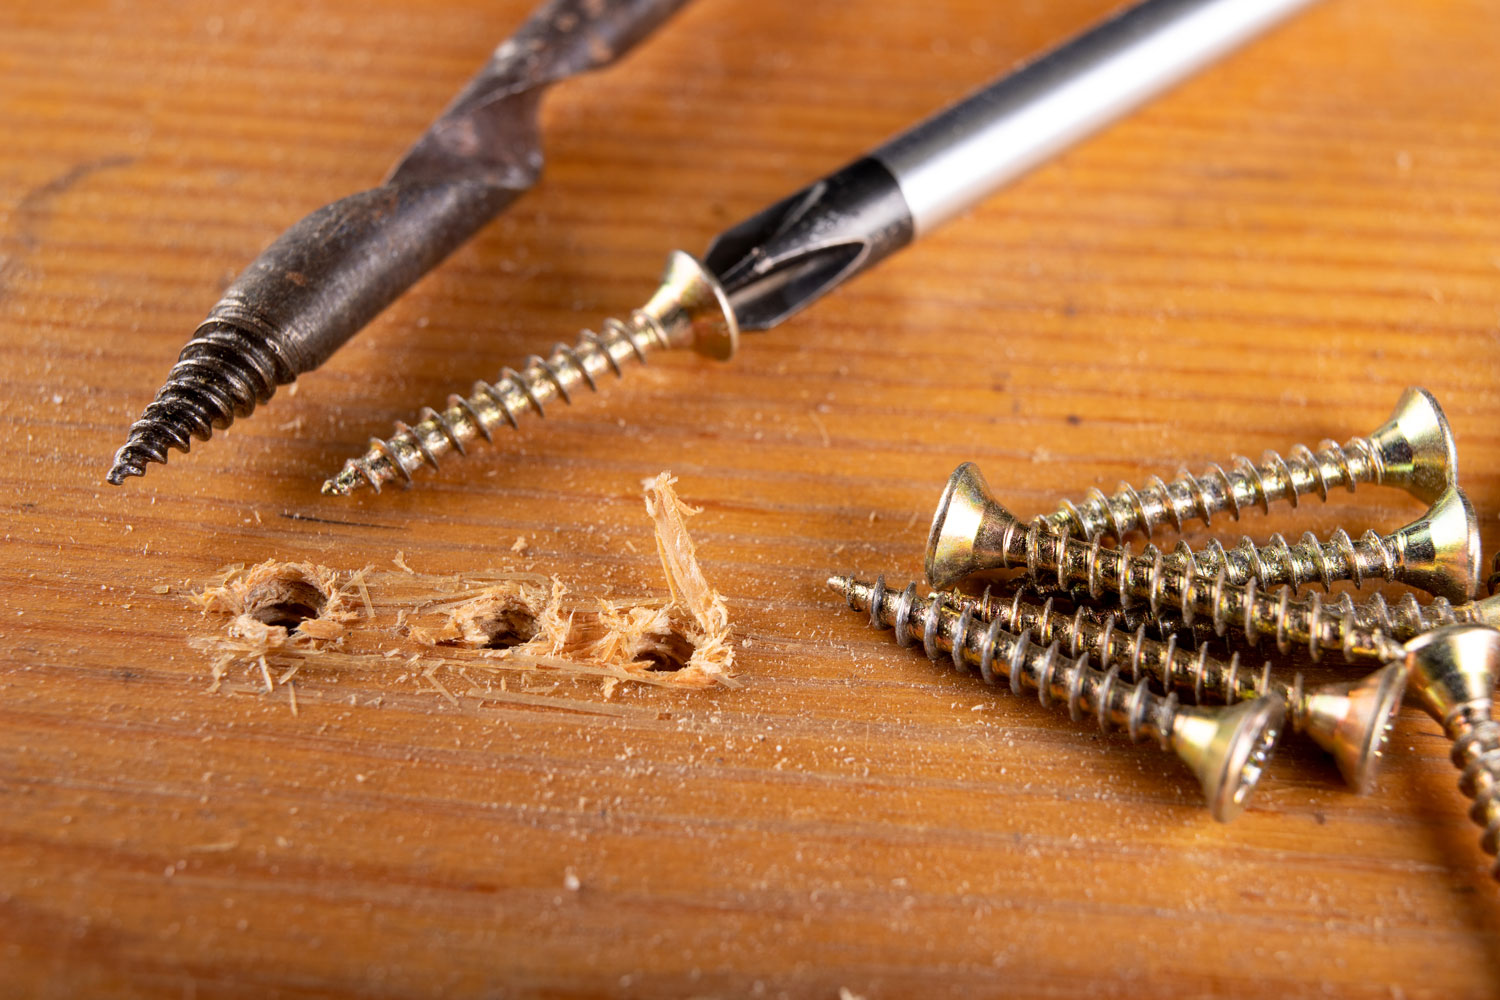 Making holes for screws